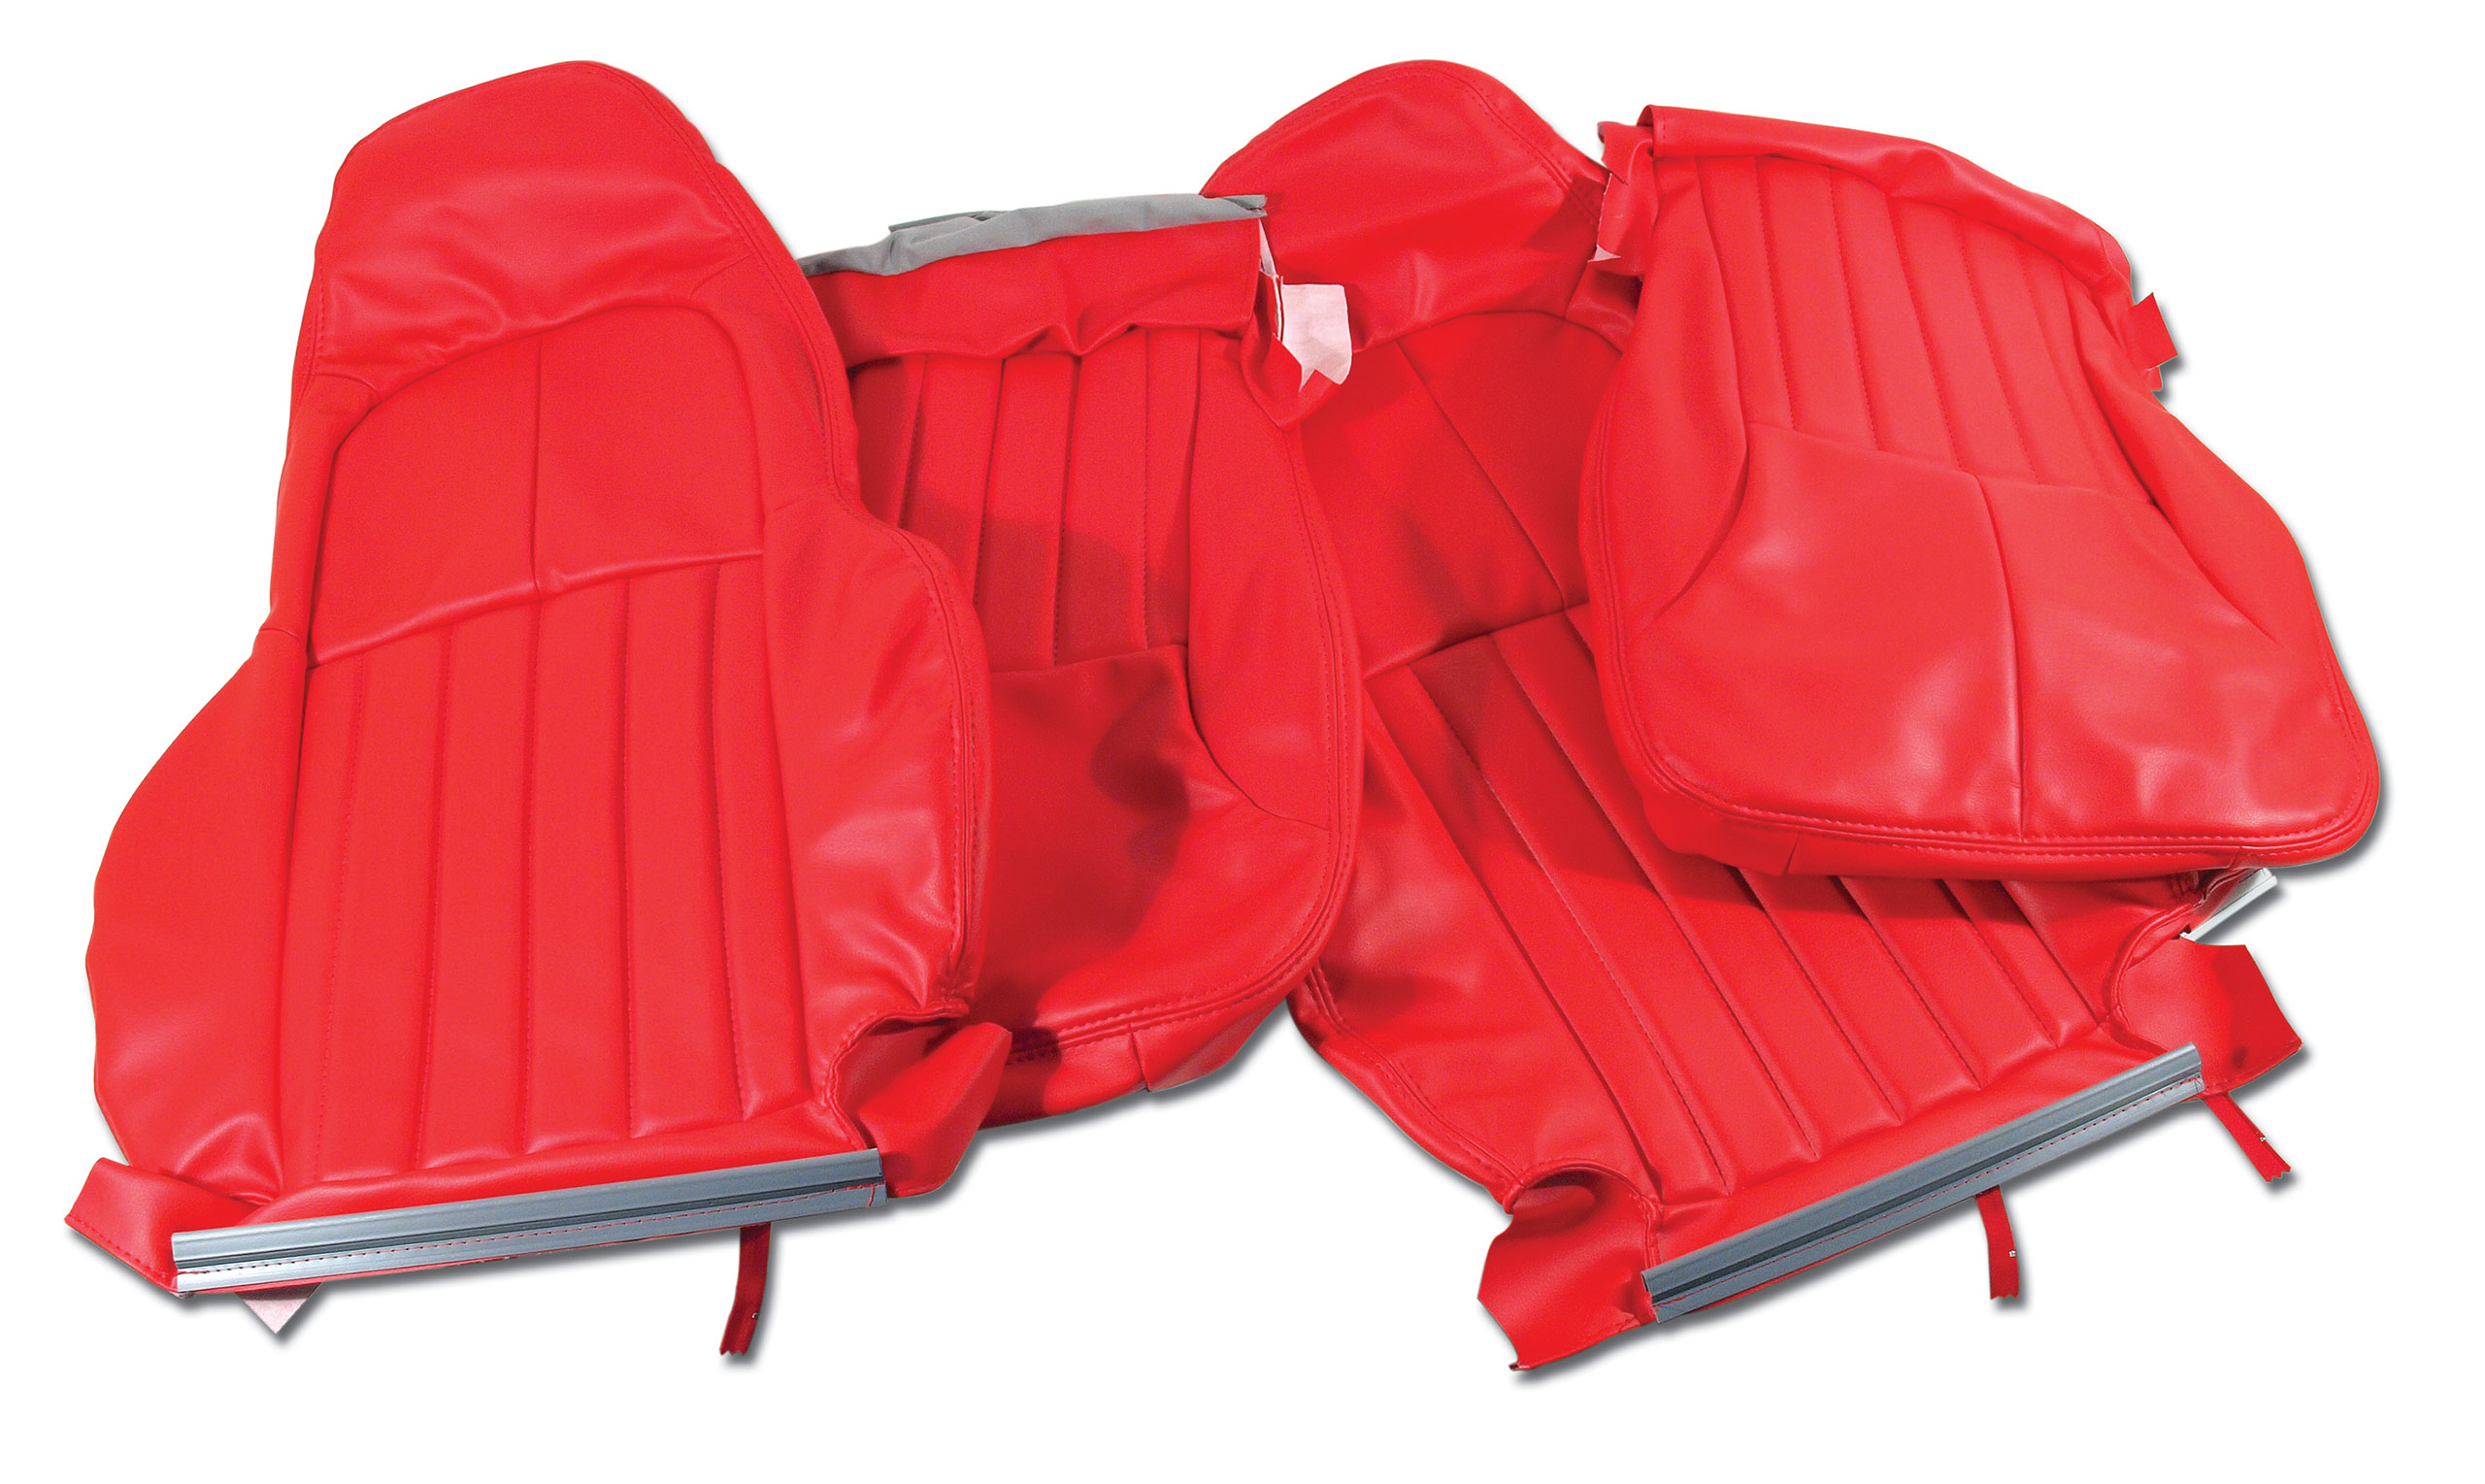 2000-2004 Corvette C5 "Leather-Like" Vinyl Standard Covers Torch Red CA-462393 